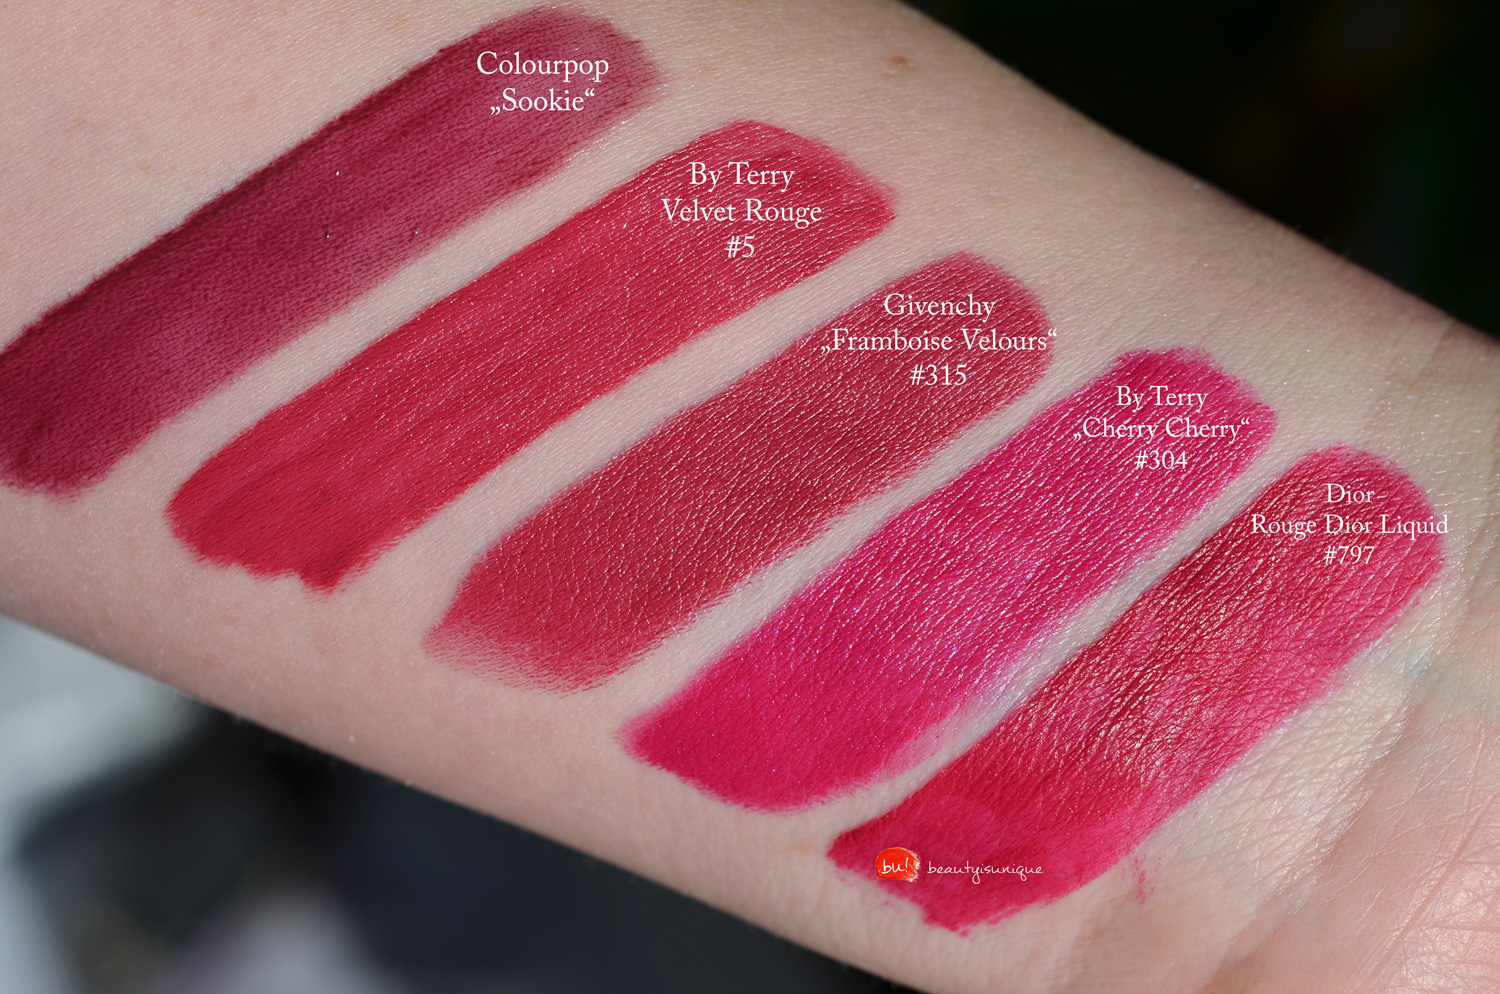 Givenchy-framboise-velours-swatches